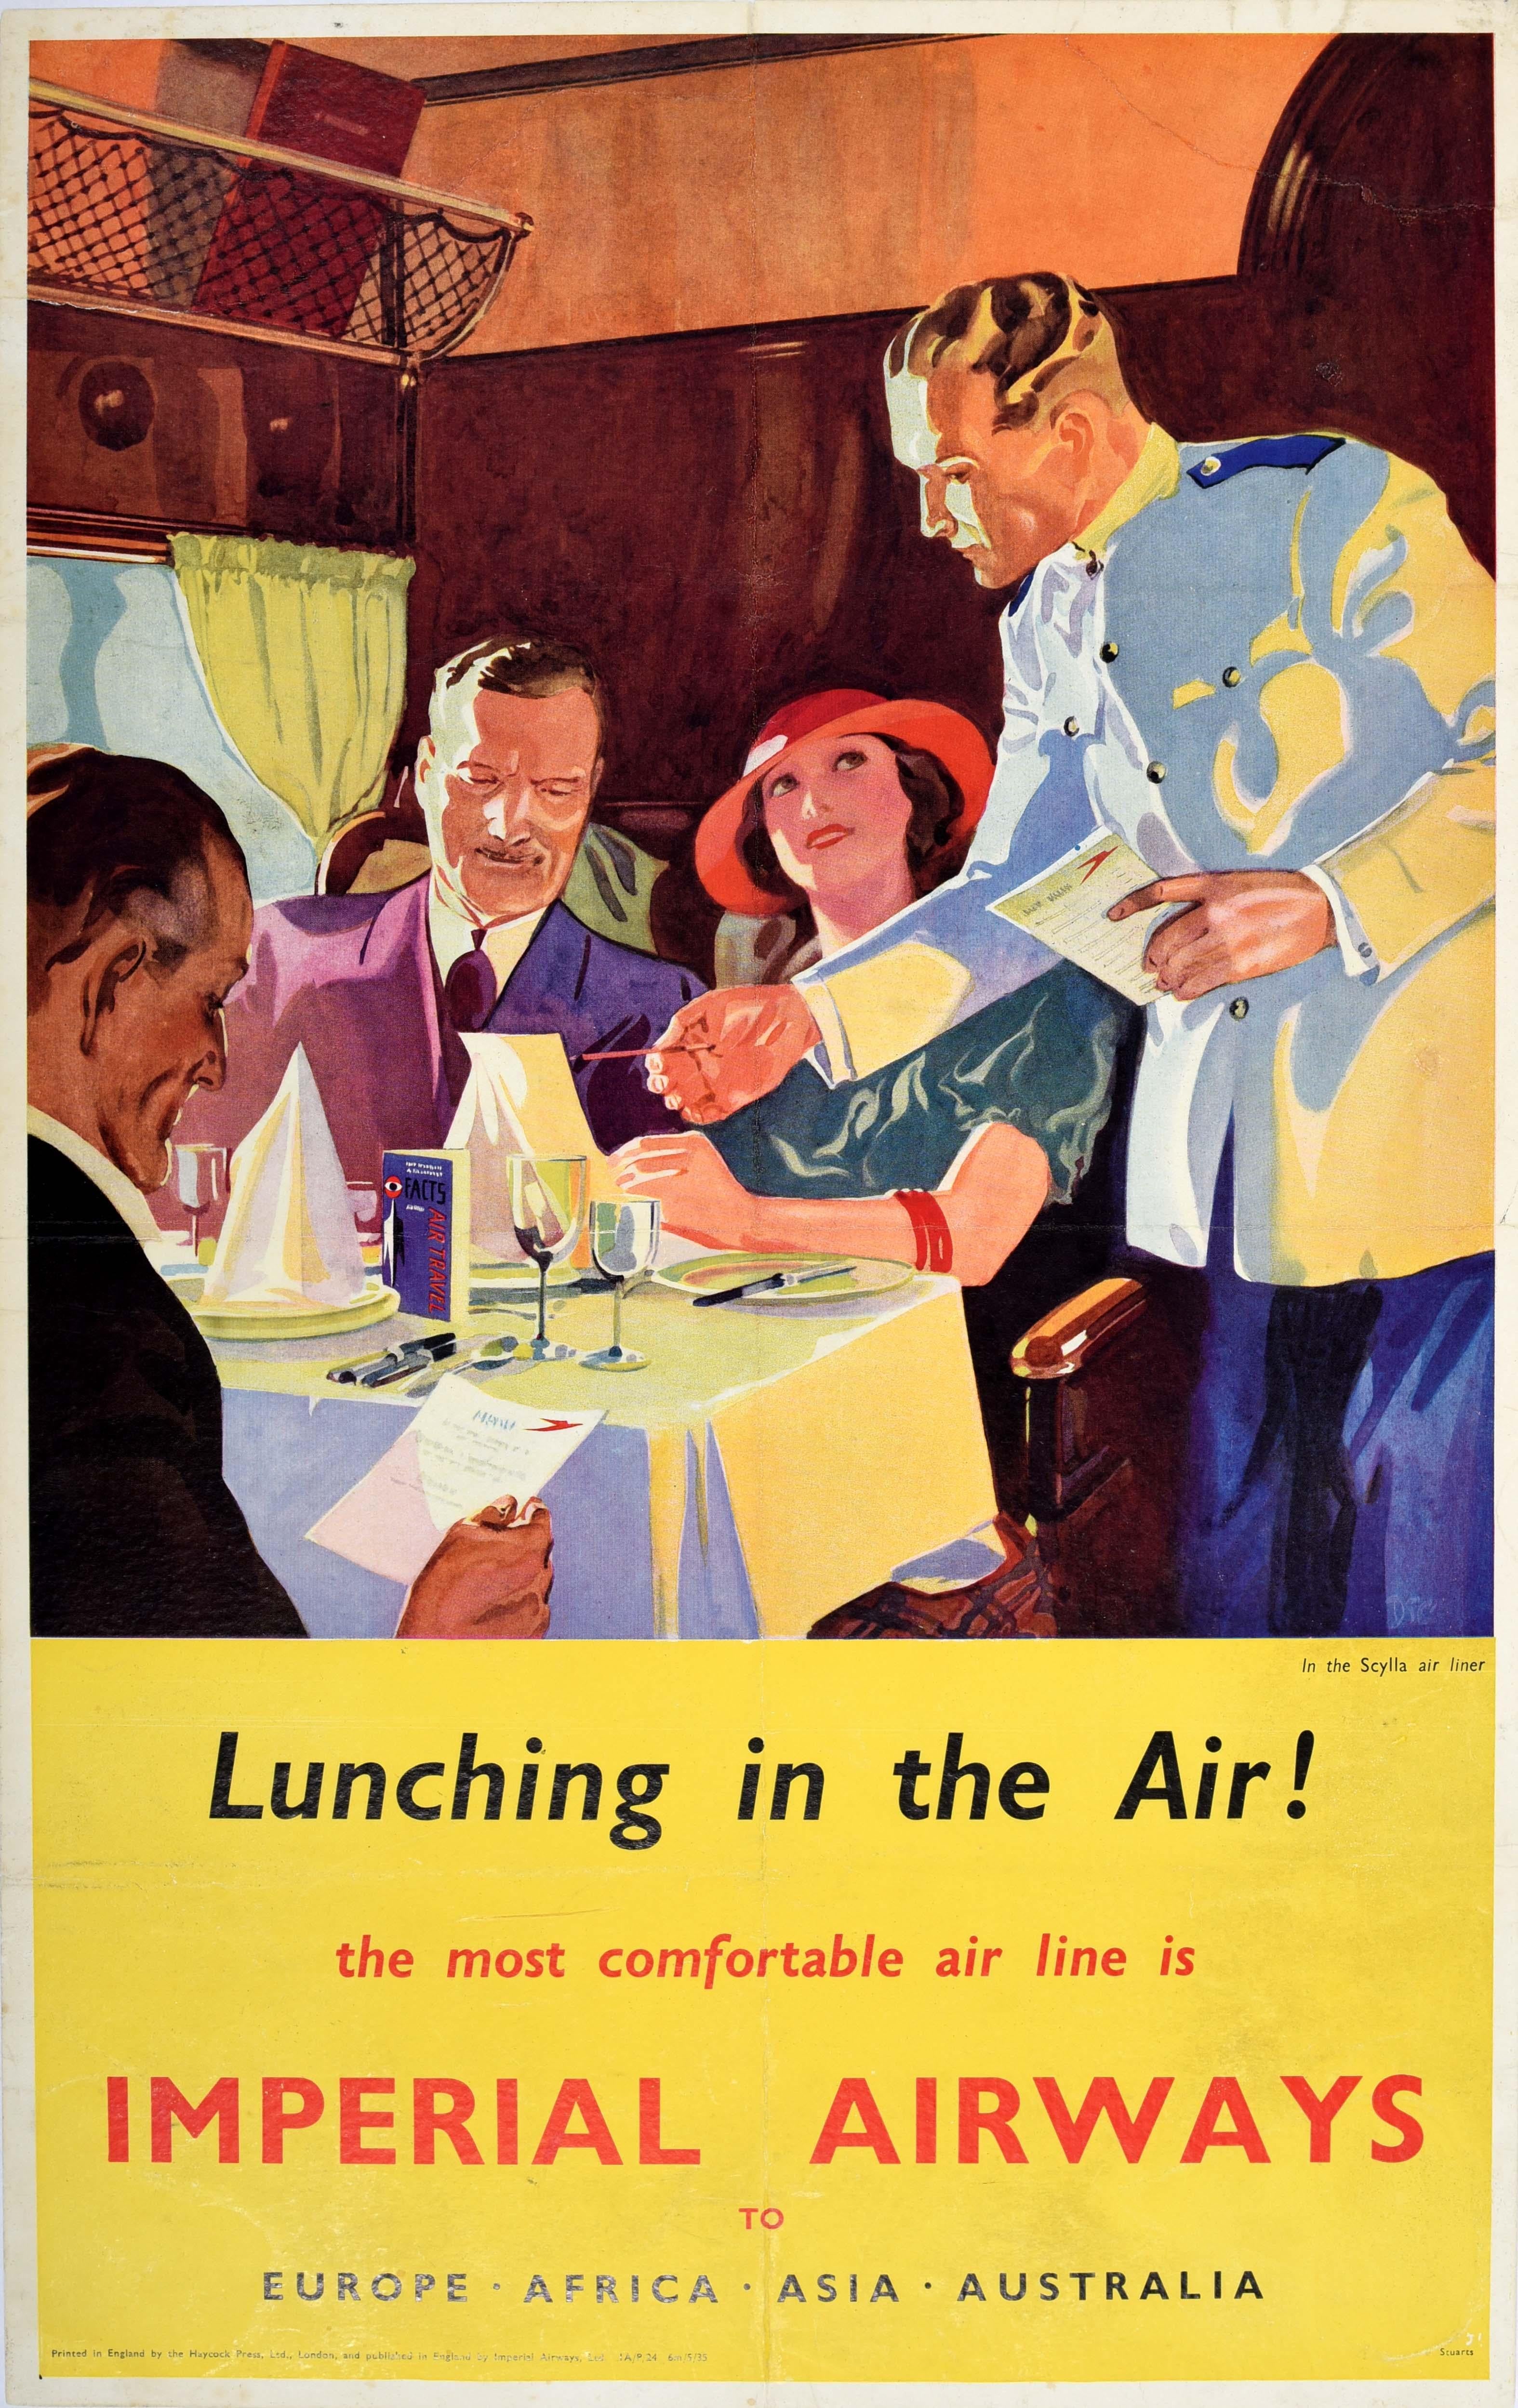 Unknown Print - Original Vintage Travel Advertising Poster Imperial Airways Lunching In The Air